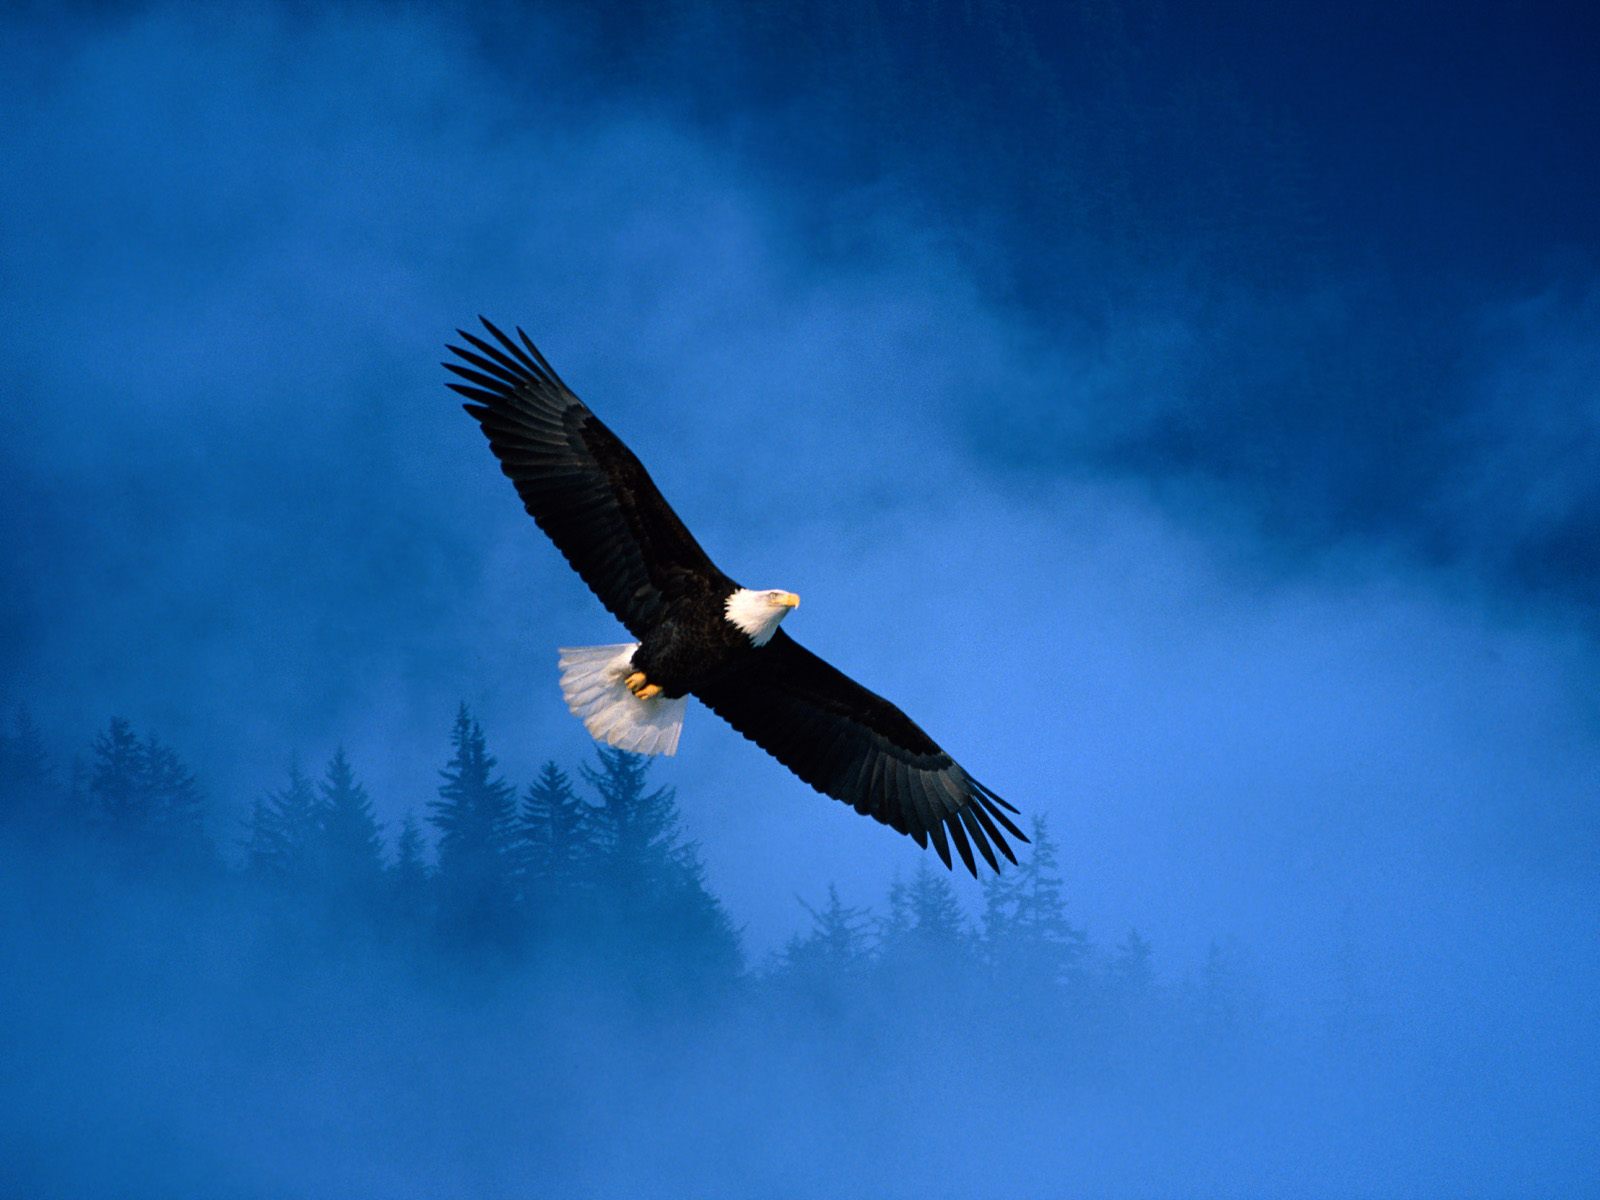 A majestic eagle taking flight, showcasing its remarkable wingspan.